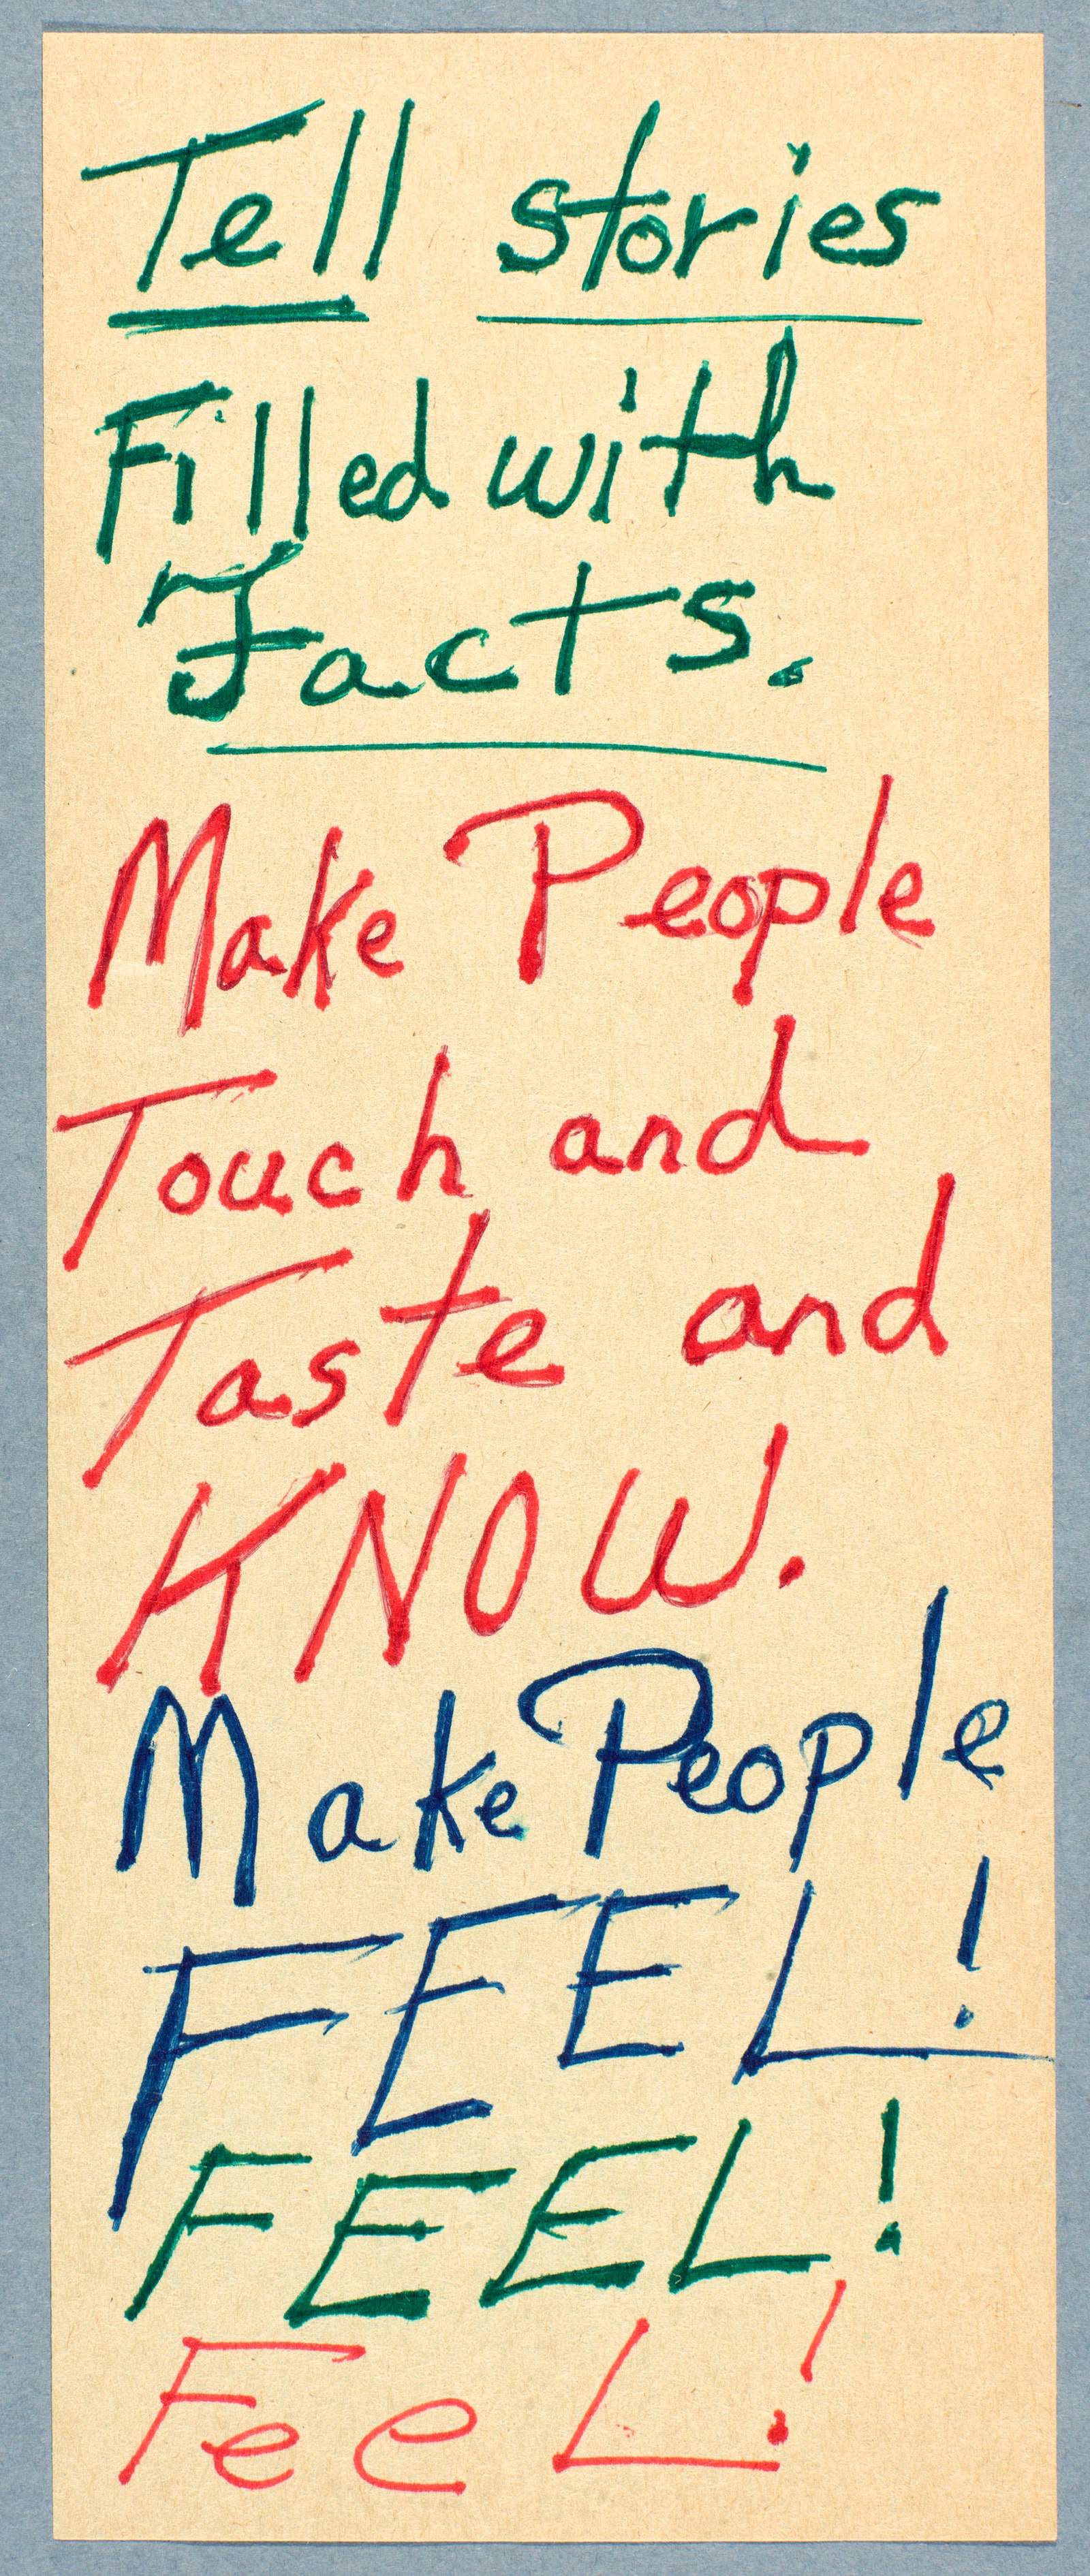 Page from Octavia Butler's notebook. The text is handwritten in green, red, and blue marker, encouraging writers to "Make people Feel! Feel Feel!"